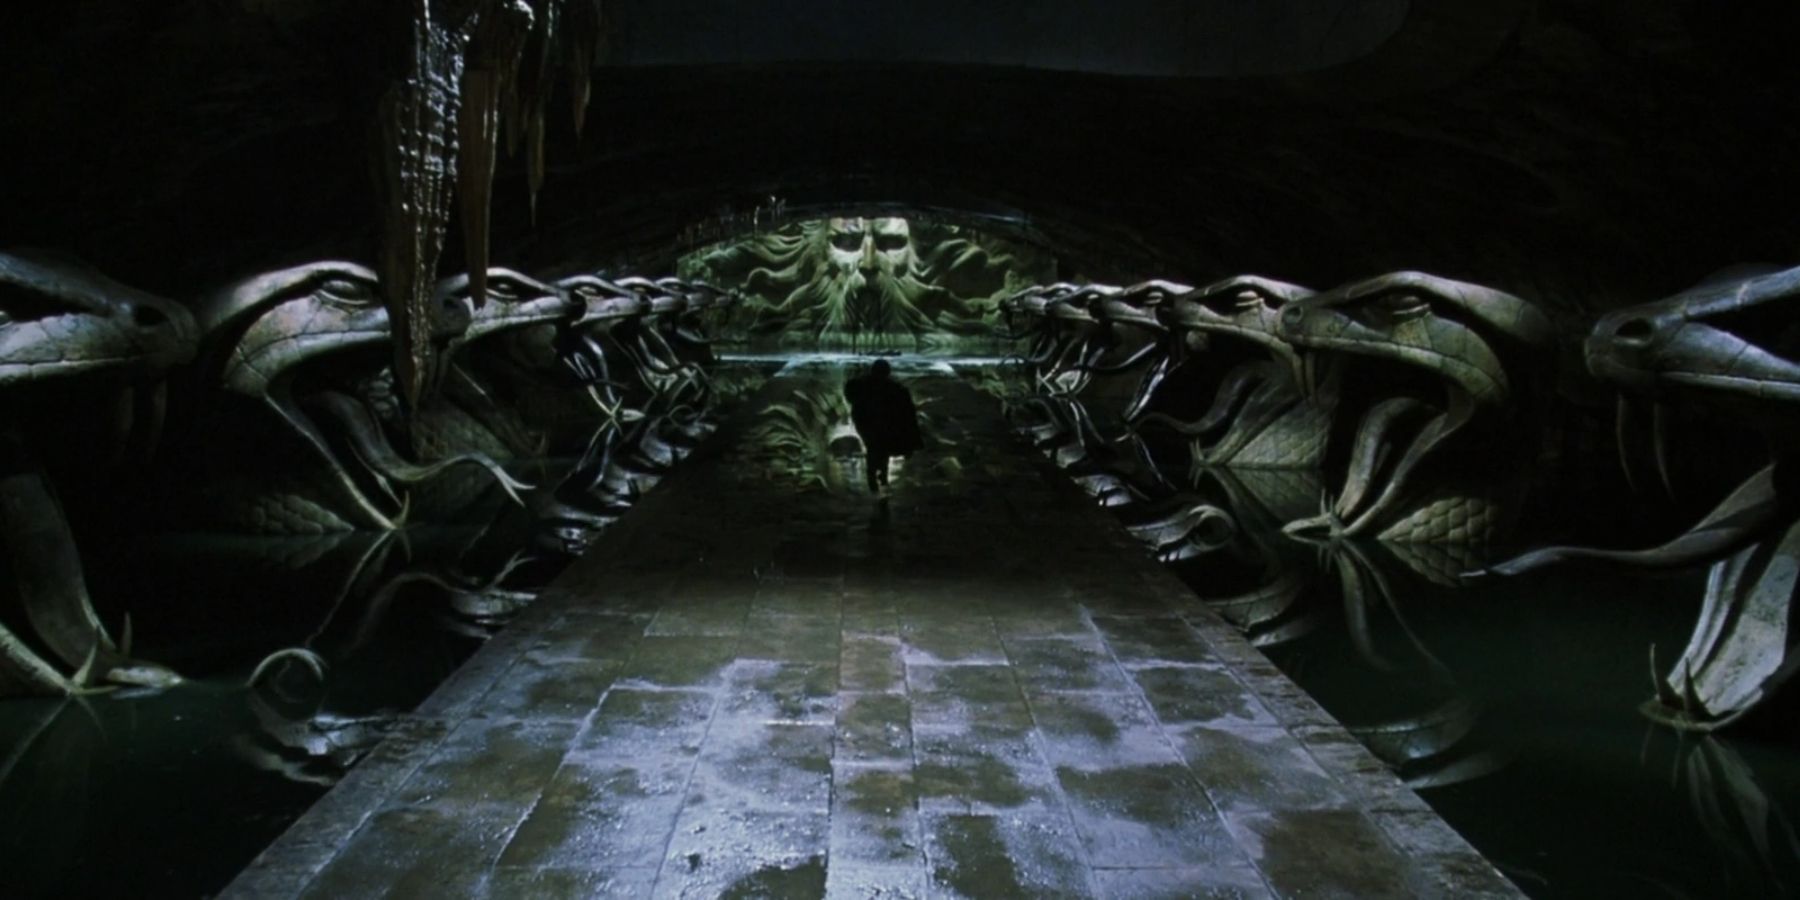 The Chamber of Secrets in Harry Potter